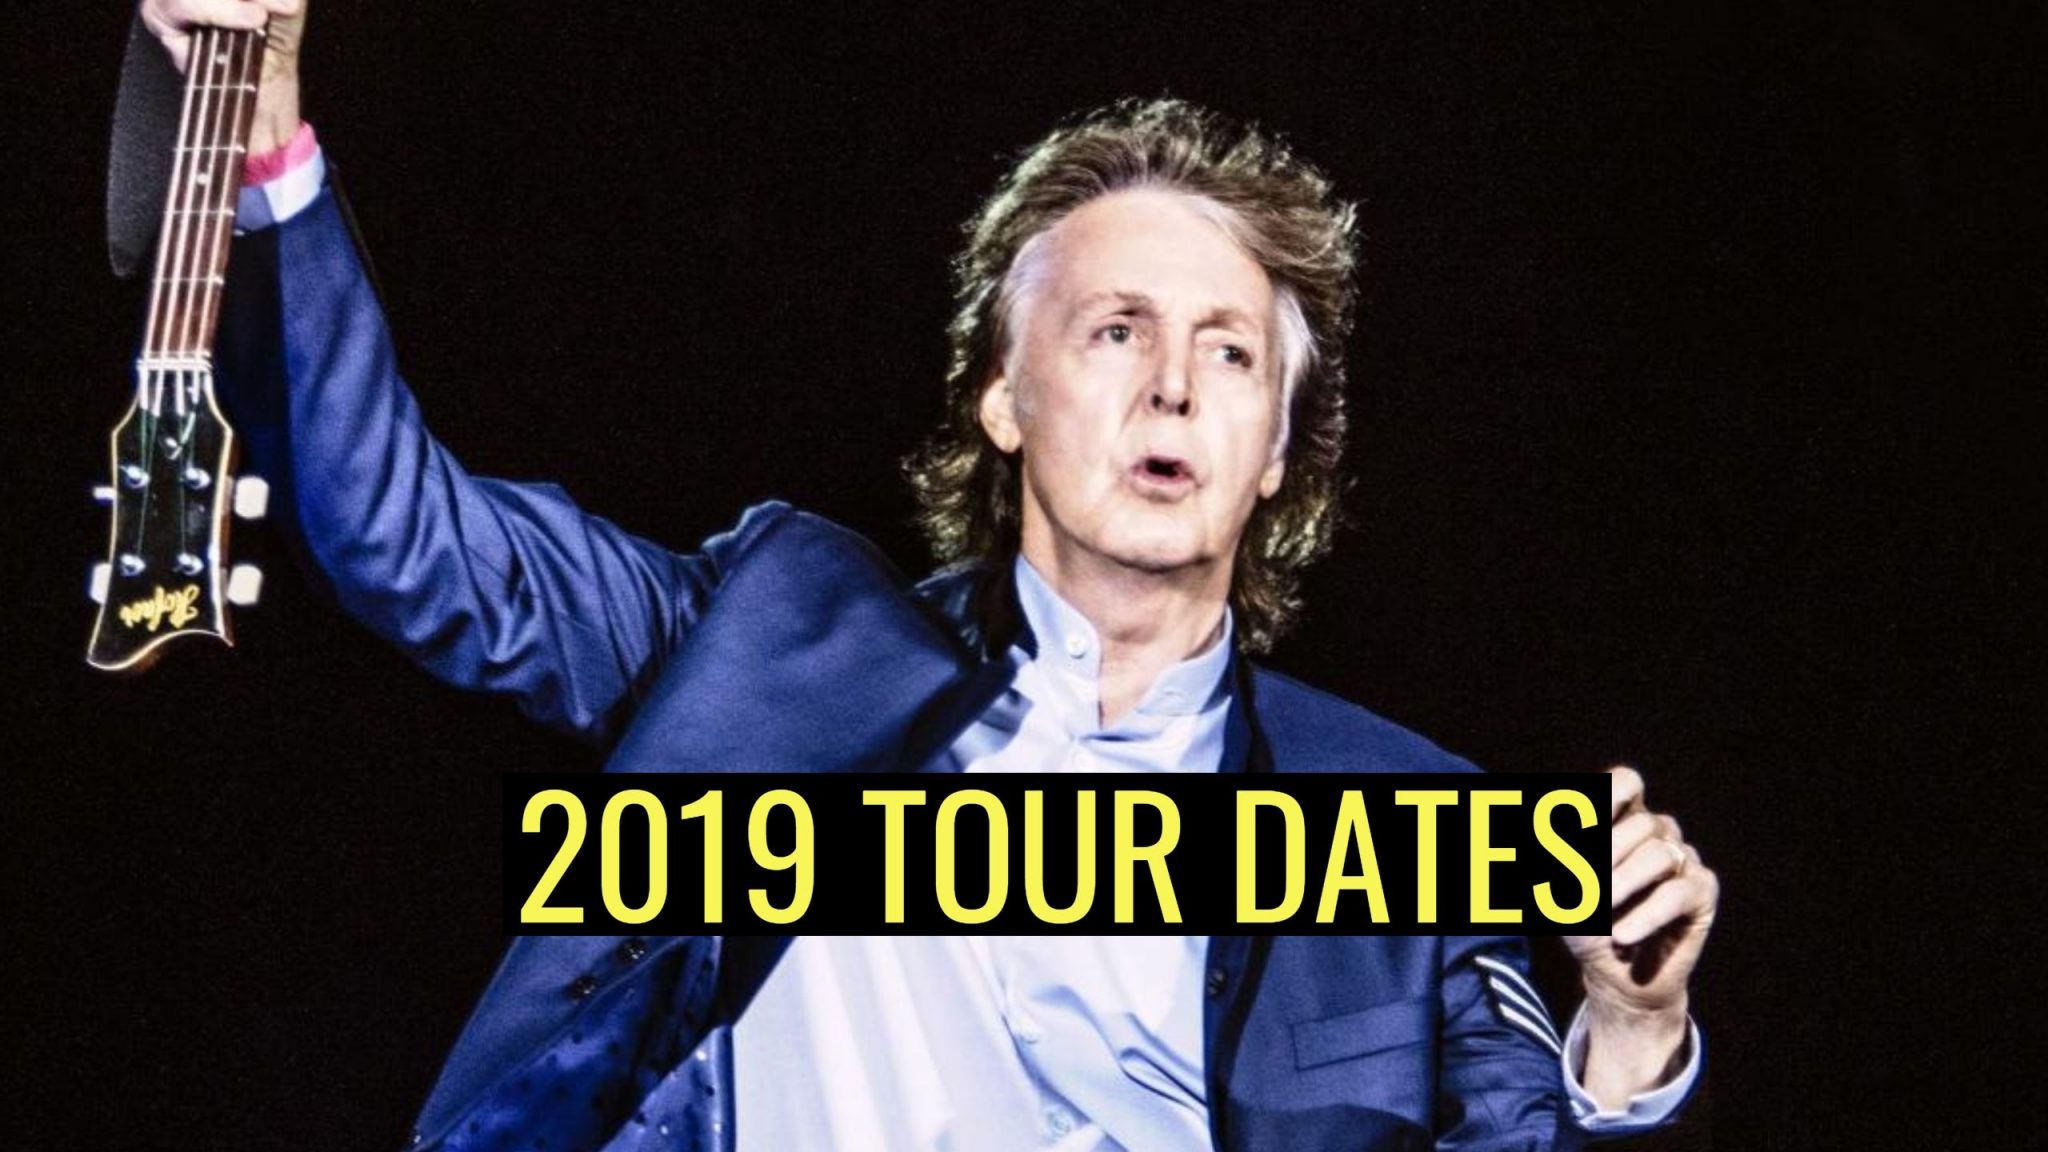 See Paul McCartney tour dates for 2019